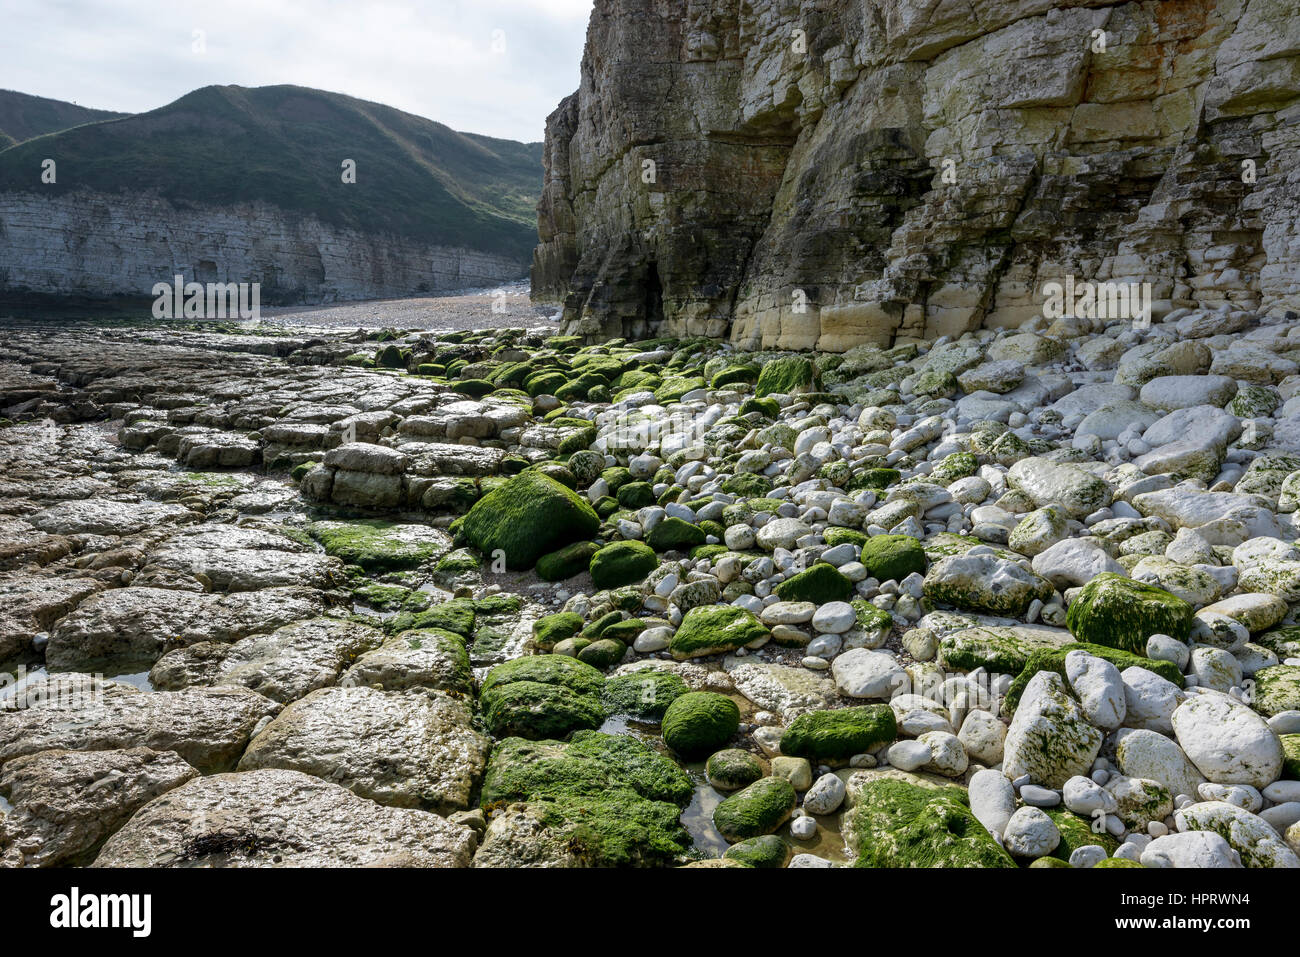 Chalk cliffs at Thornwich bay near Flamborough on the east coast of England. An area of beautiful natural scenery. Stock Photo